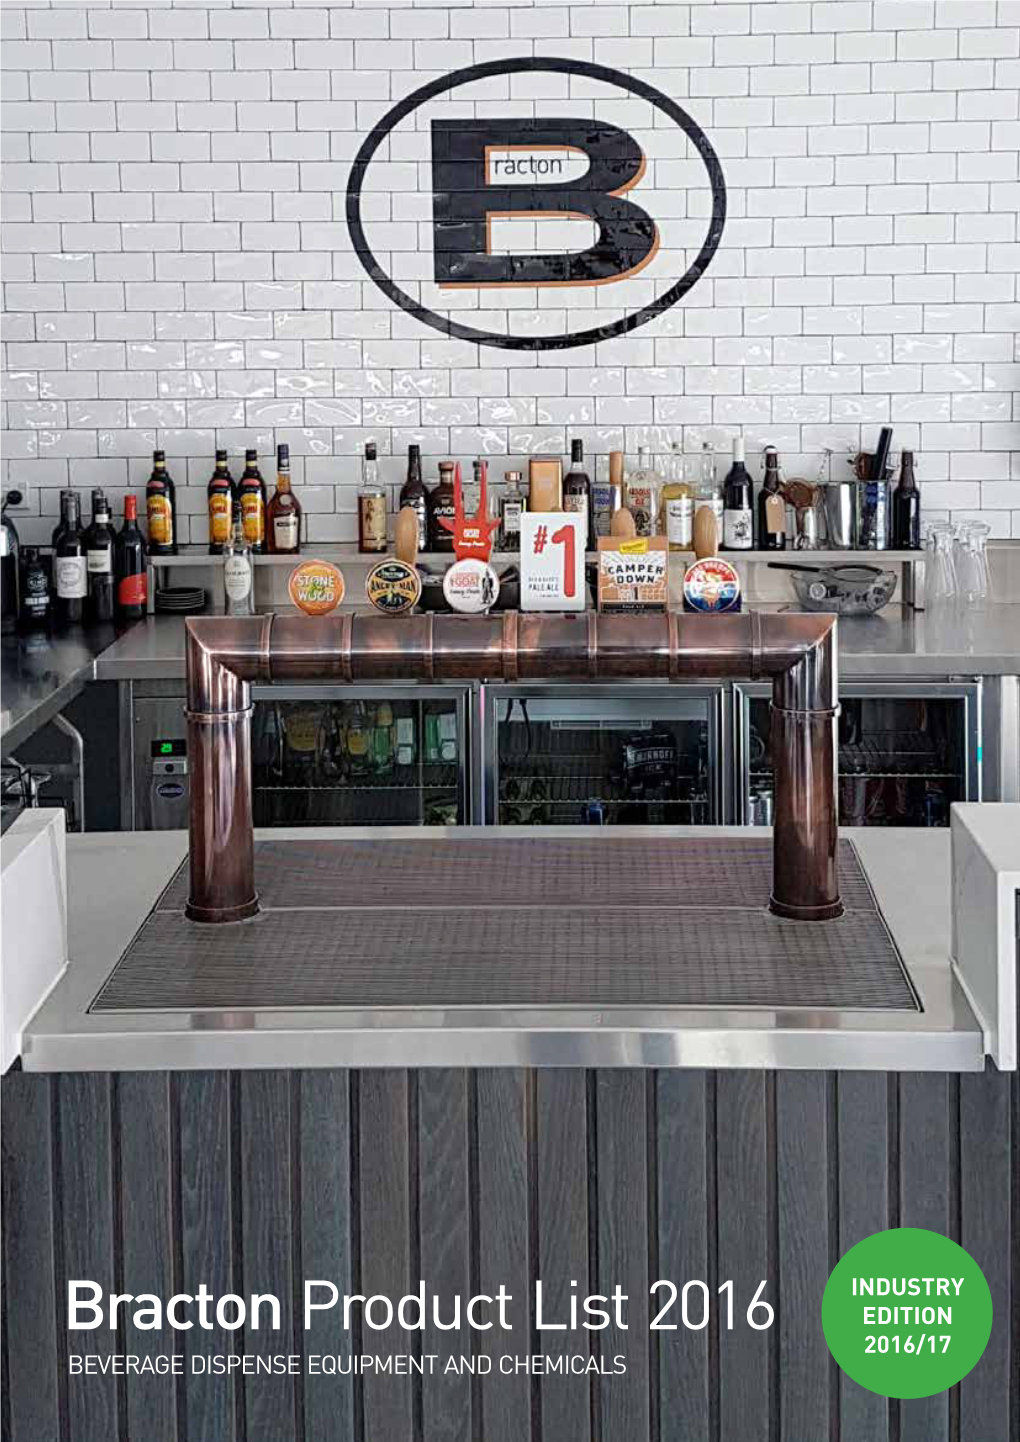 Bracton Product List 2016 EDITION 2016/17 BEVERAGE DISPENSE EQUIPMENT and CHEMICALS BRACTON - the LEADING BEVERAGE DISPENSE EQUIPMENT and CHEMICALS INNOVATOR